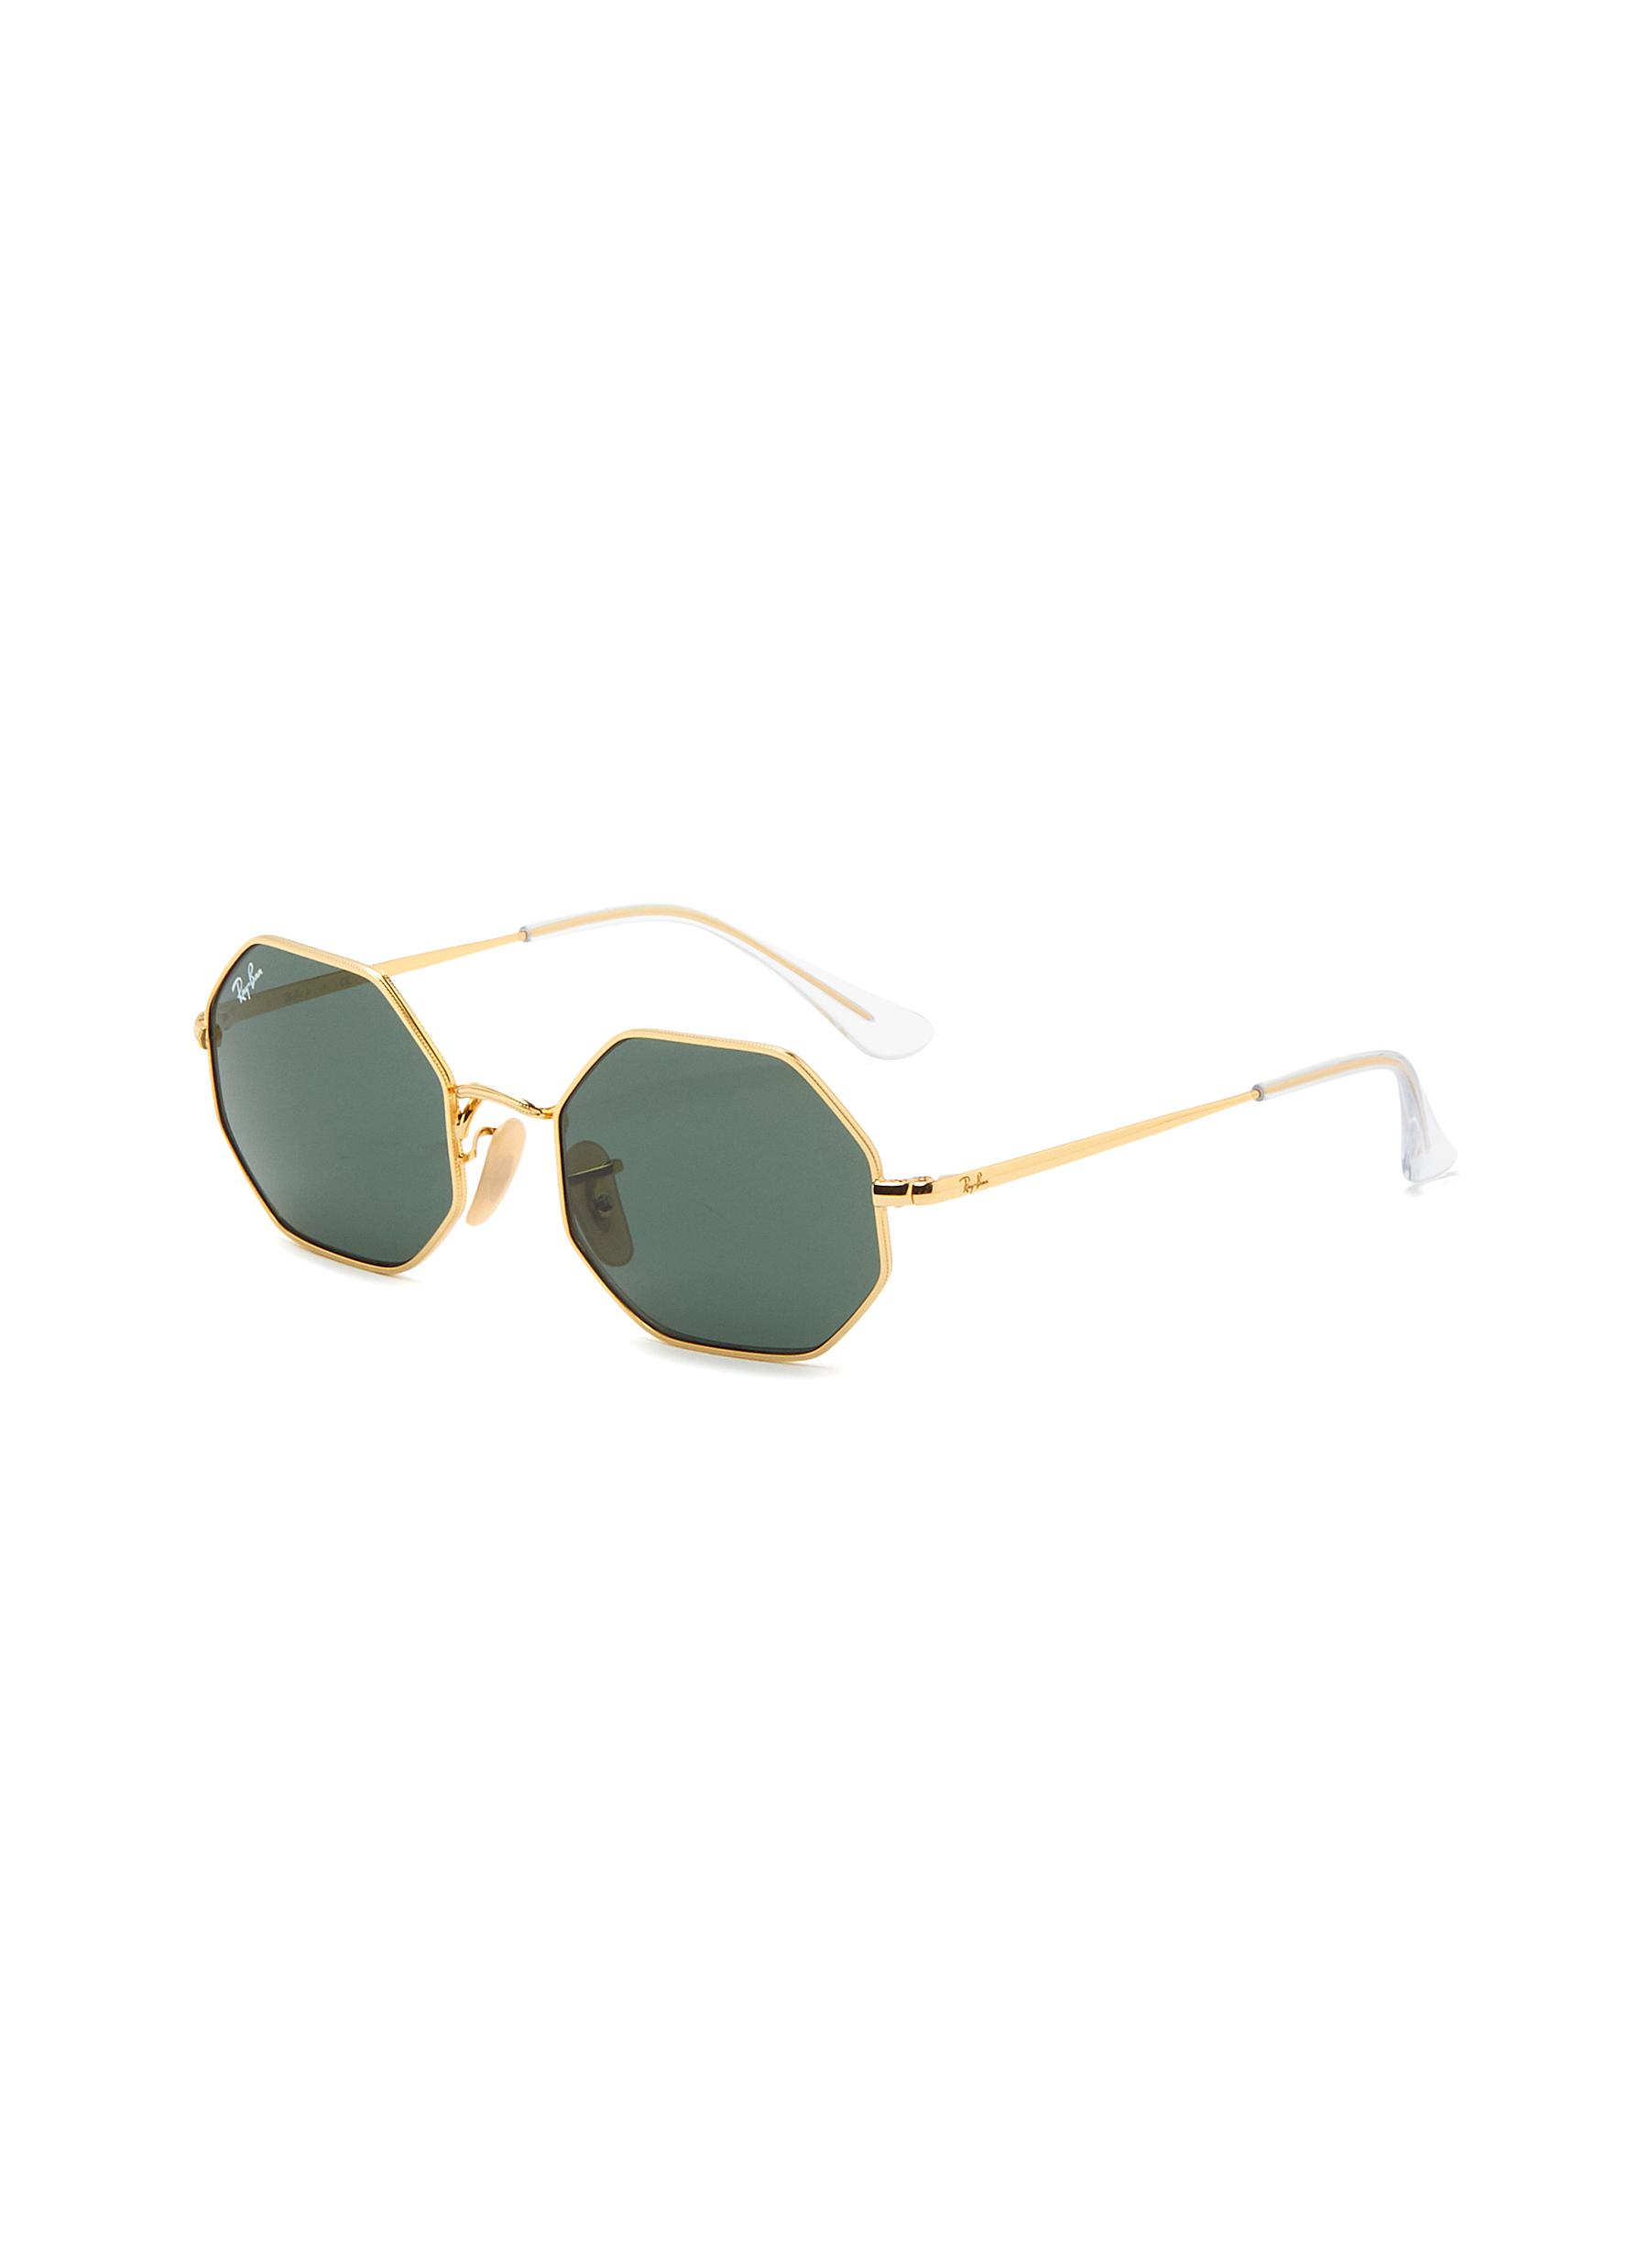 what are ray ban junior sunglasses